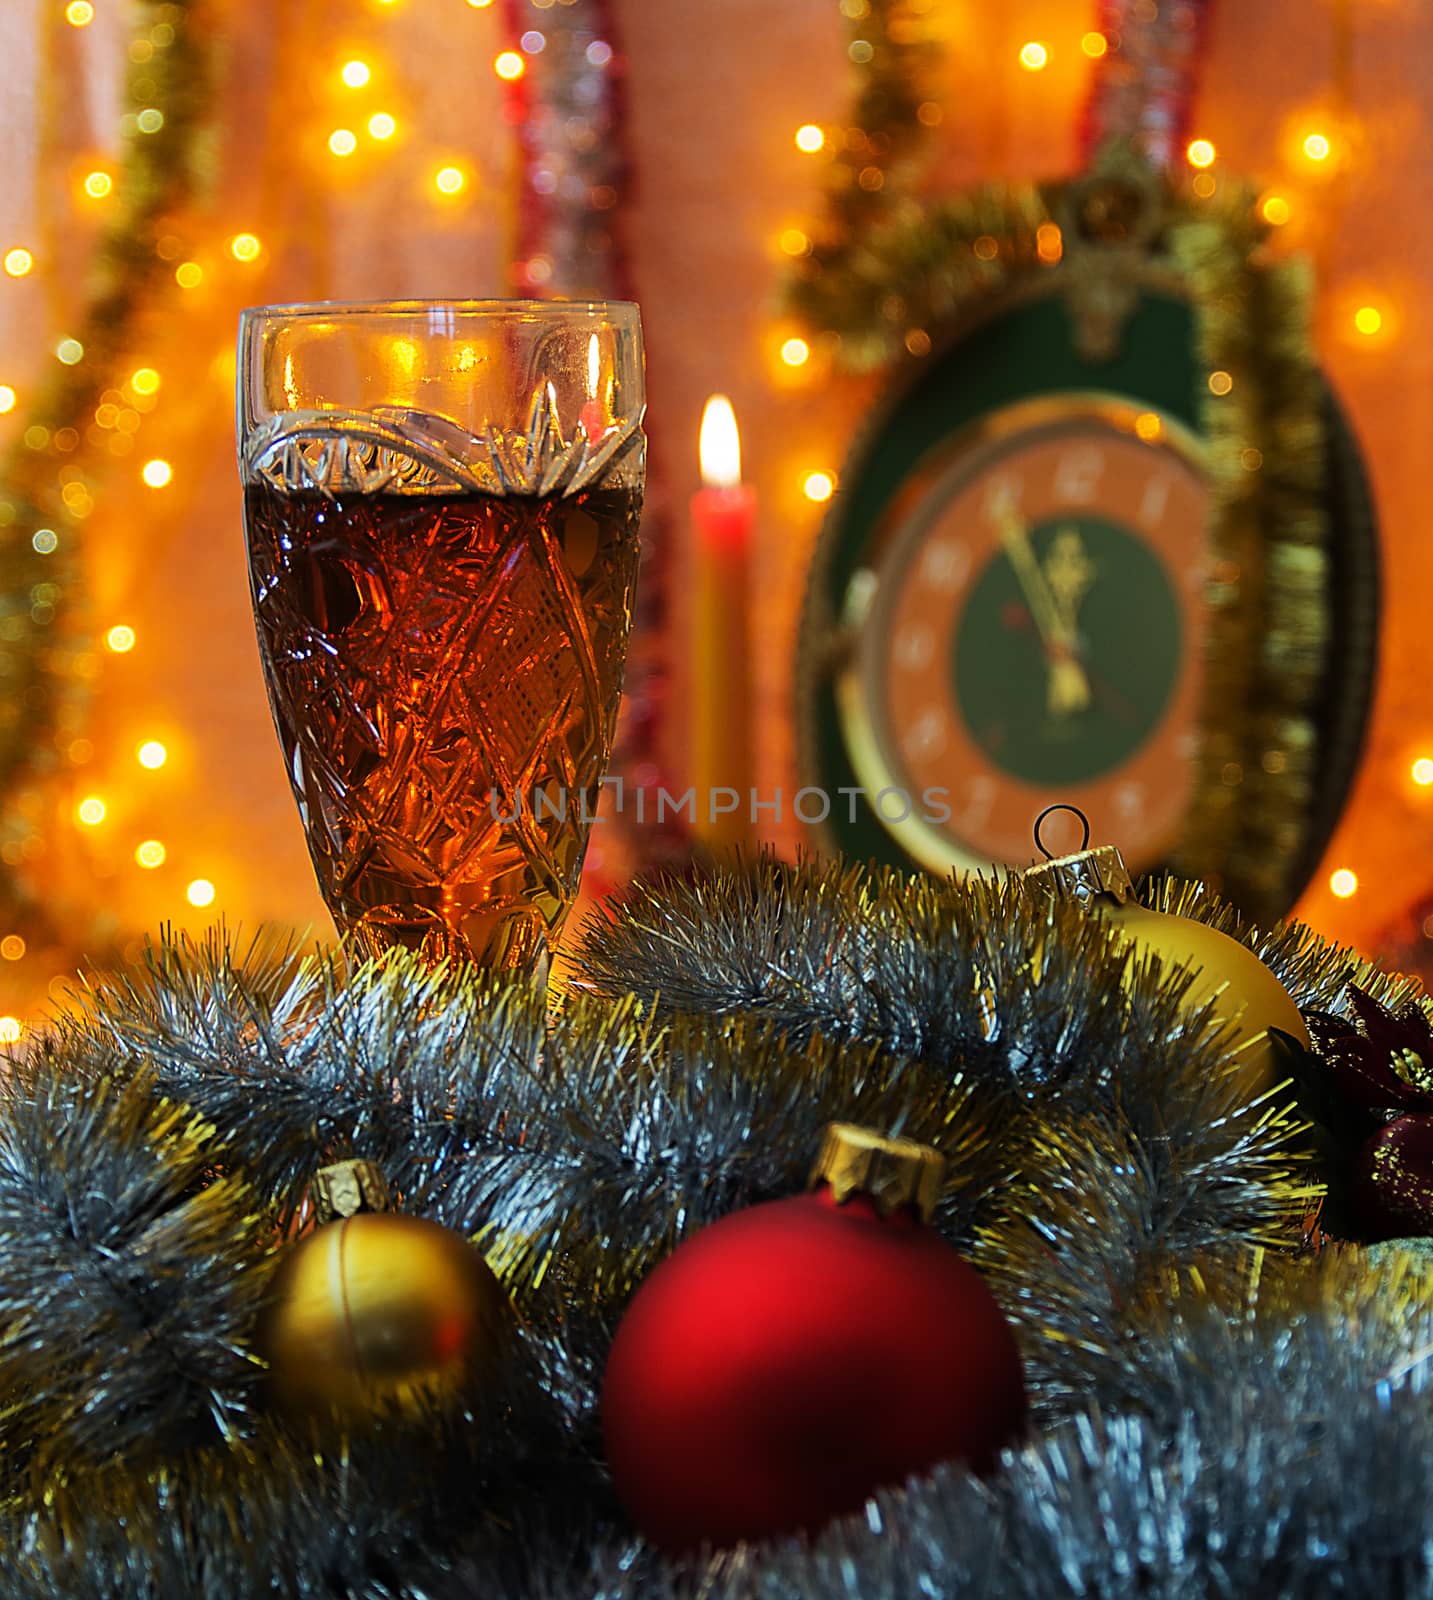 In the foreground is a wine glass with wine. Christmas ornaments lie around Fougeres. In the background is out of focus and see the candle clock, in which time five minutes to twelve. Background illuminated garland.

